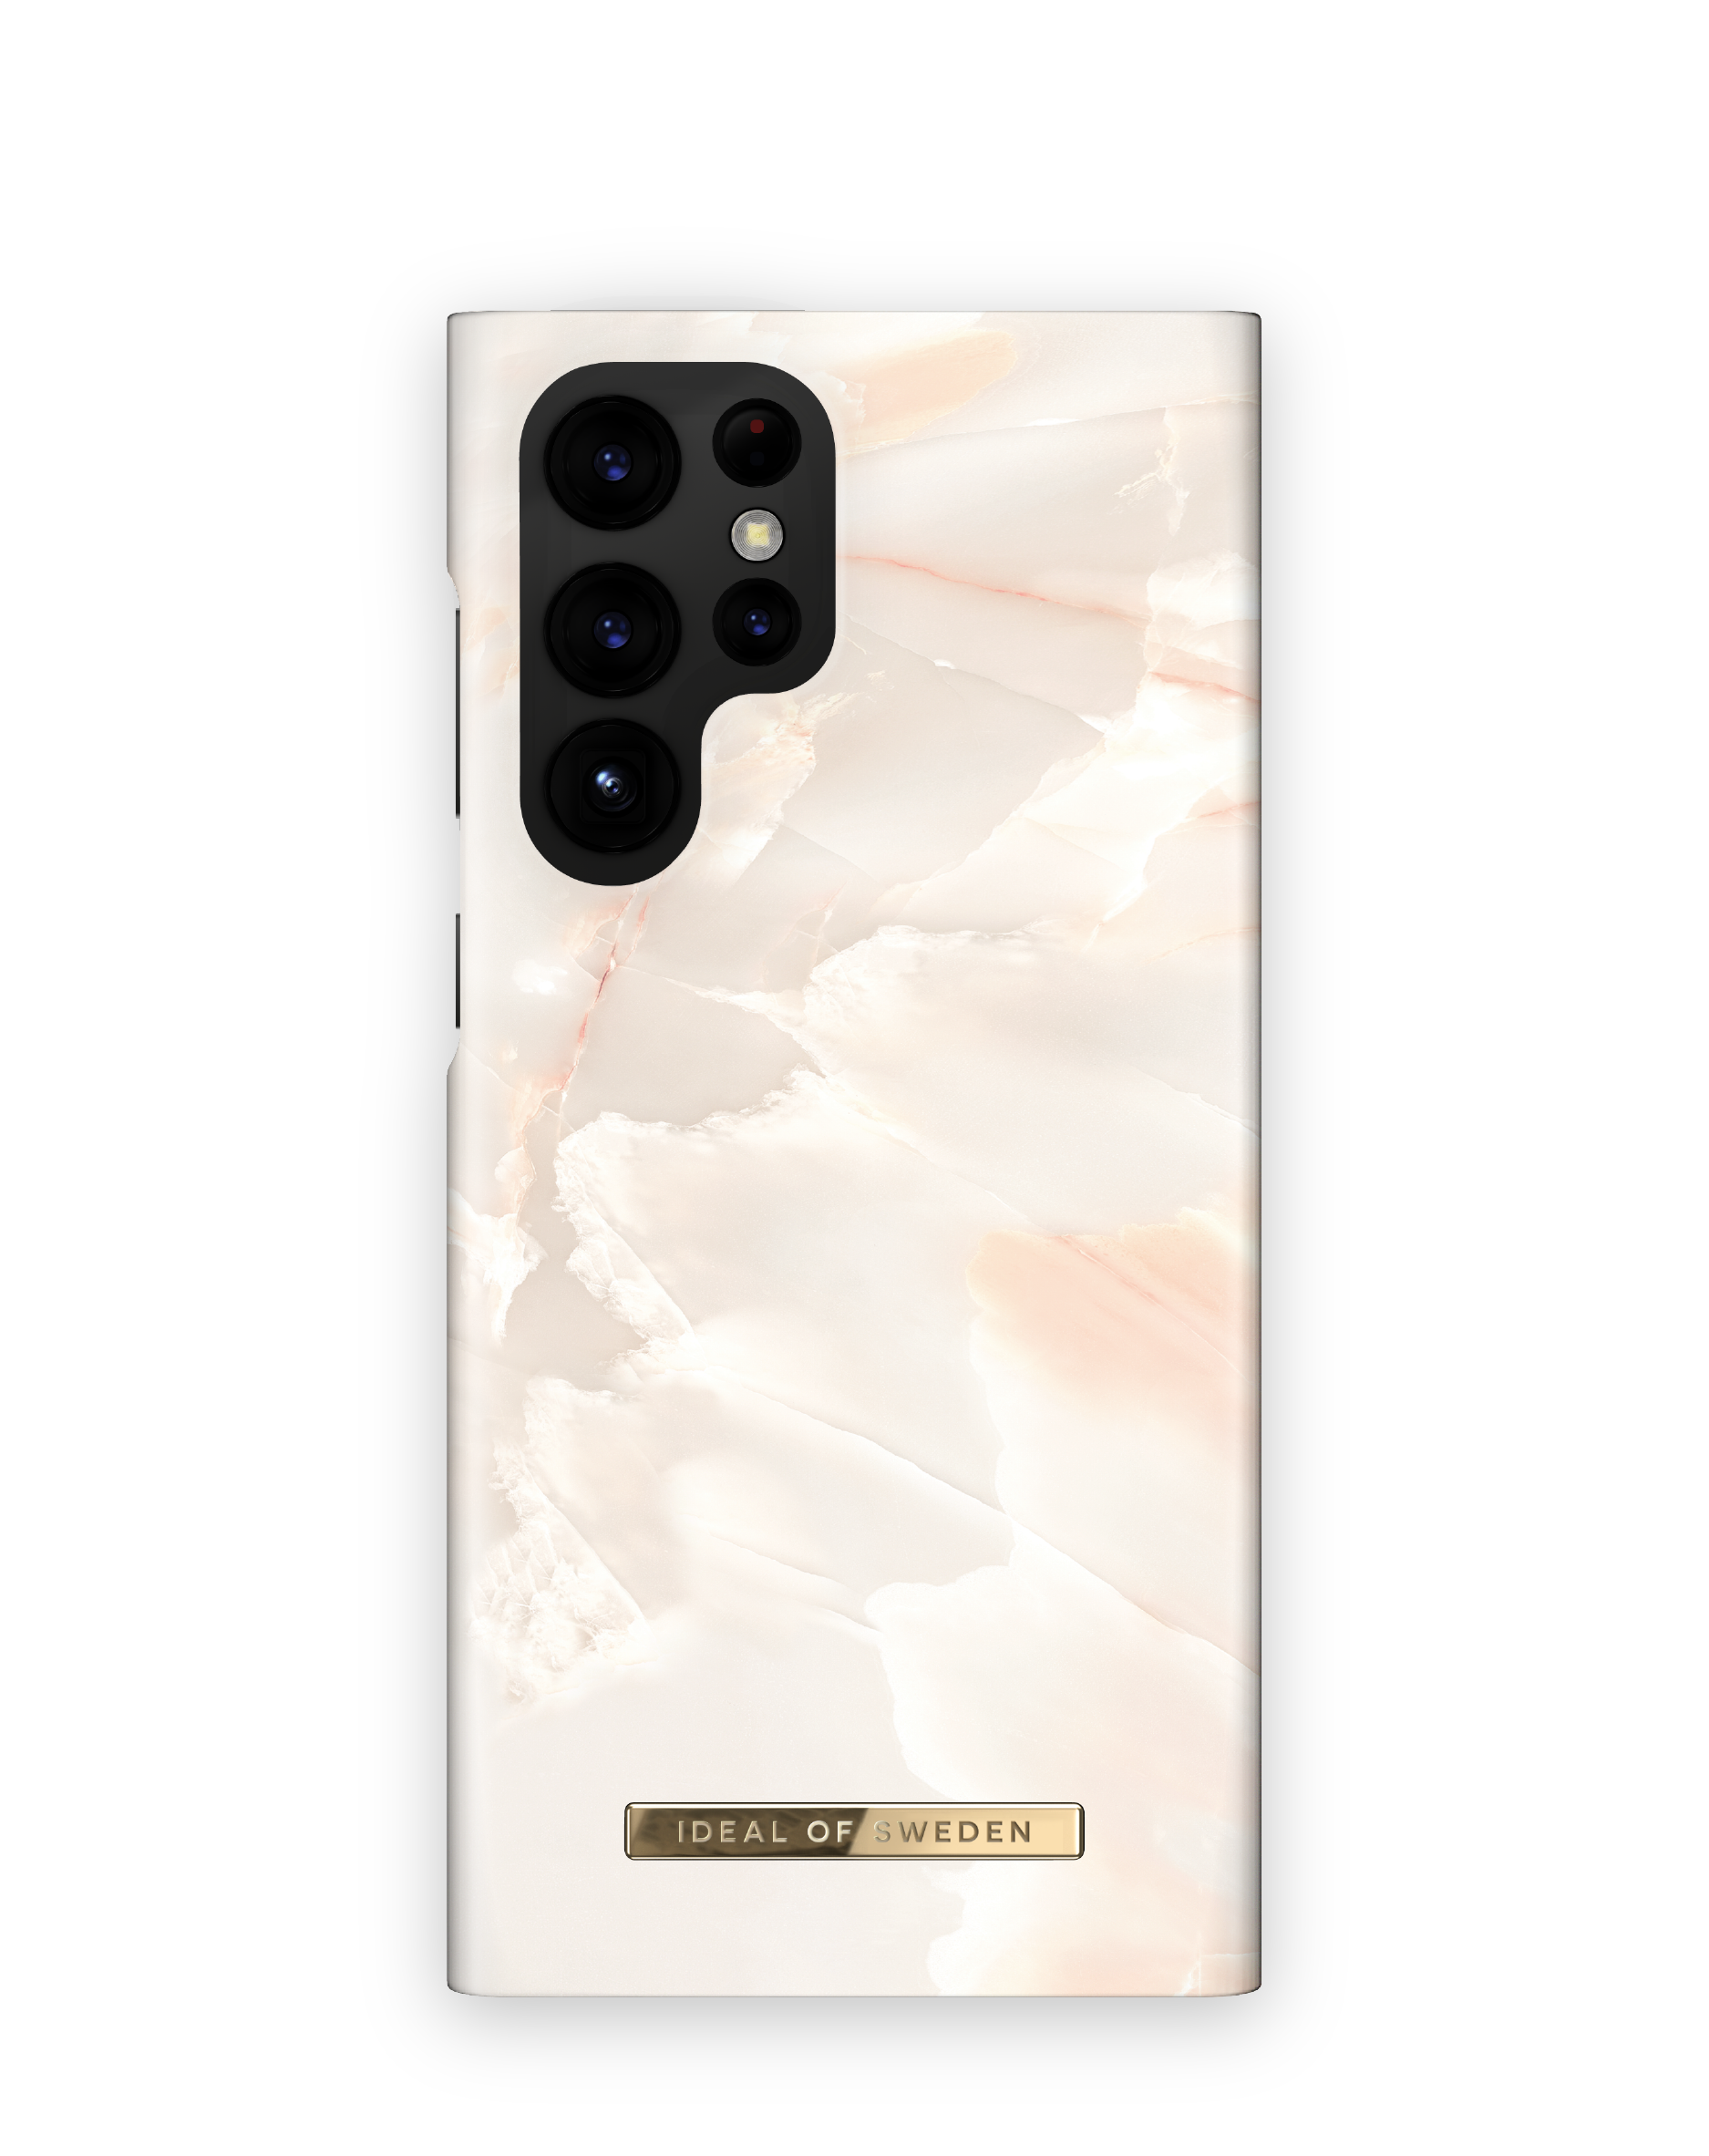 Backcover, S22 IDFCSS21-S22U-257, Marble Galaxy Samsung, IDEAL SWEDEN Rose Pearl OF Ultra,